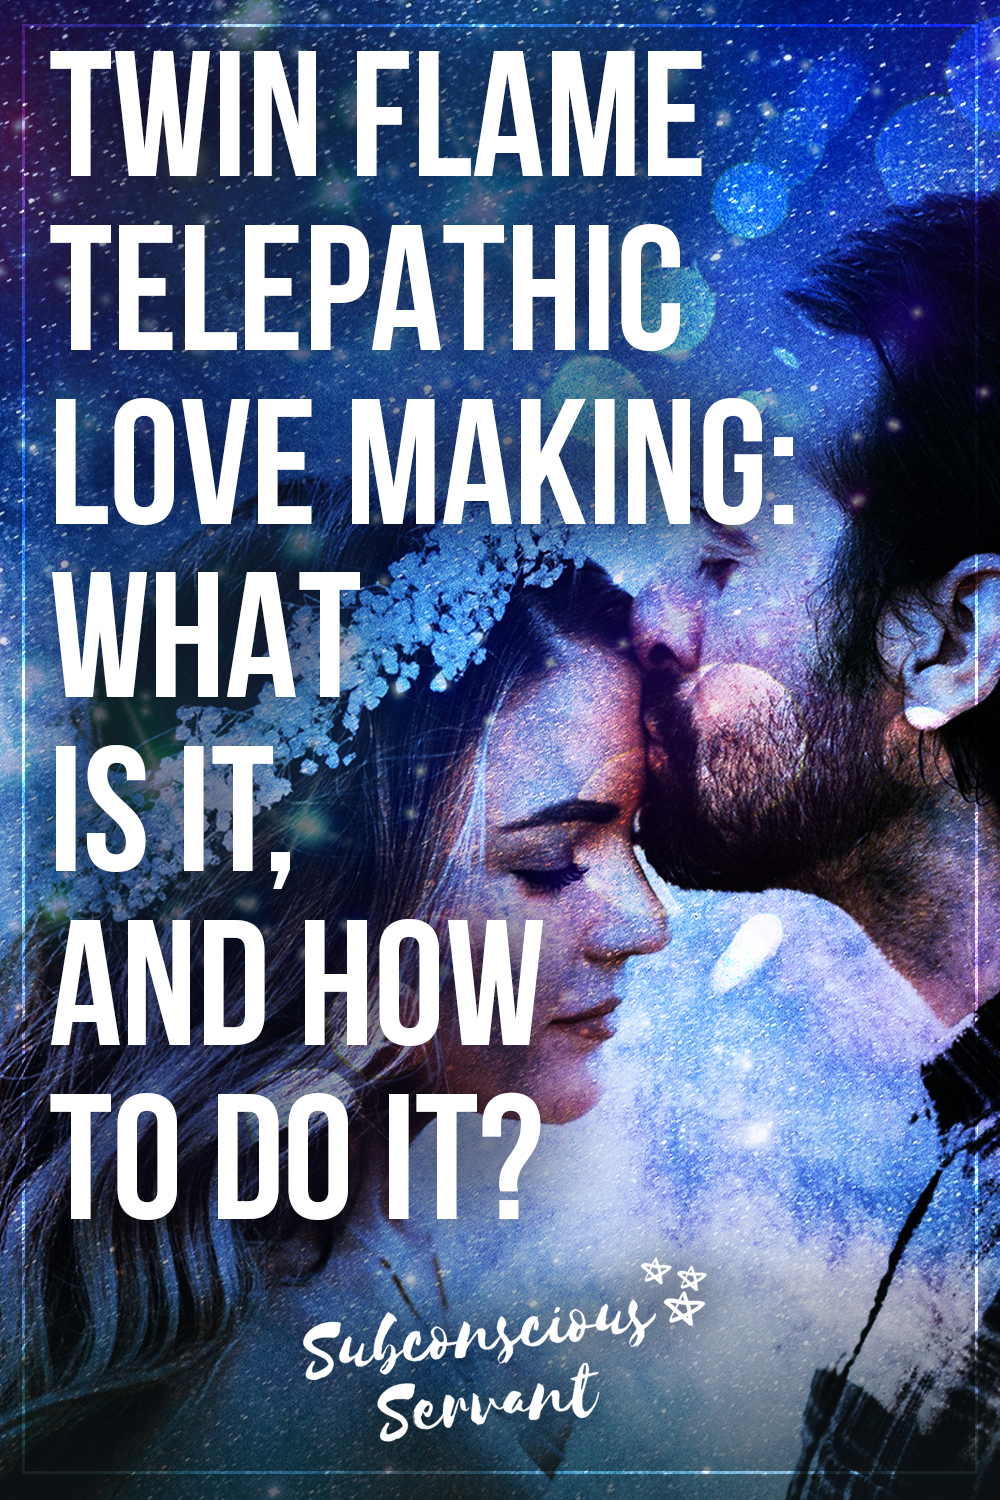 Twin Flame Telepathic Love Making: What Is It, And How To Do It?